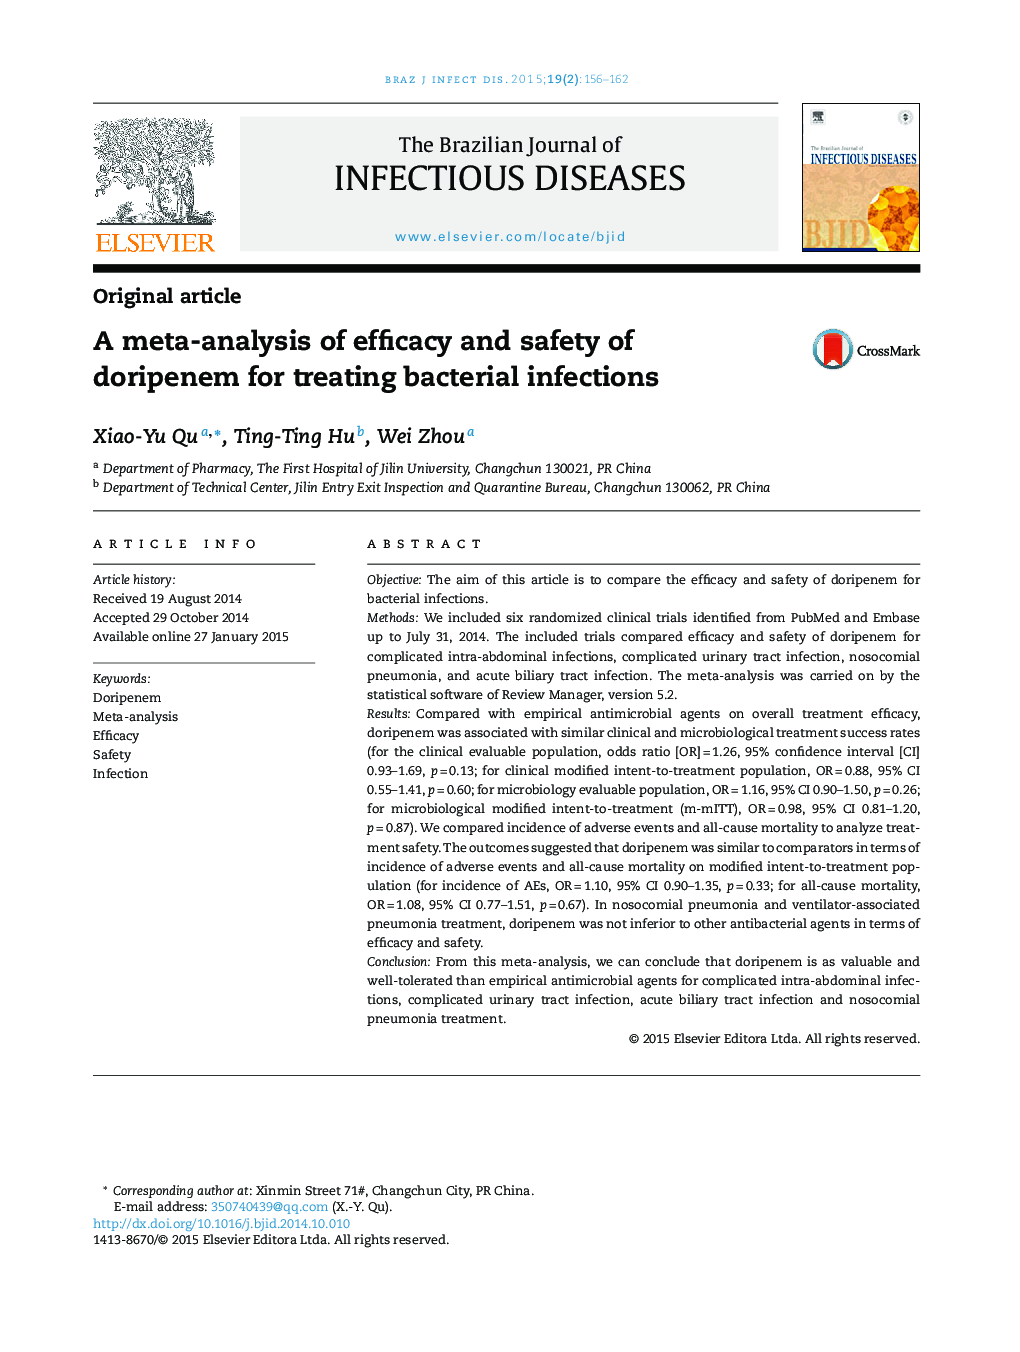 A meta-analysis of efficacy and safety of doripenem for treating bacterial infections